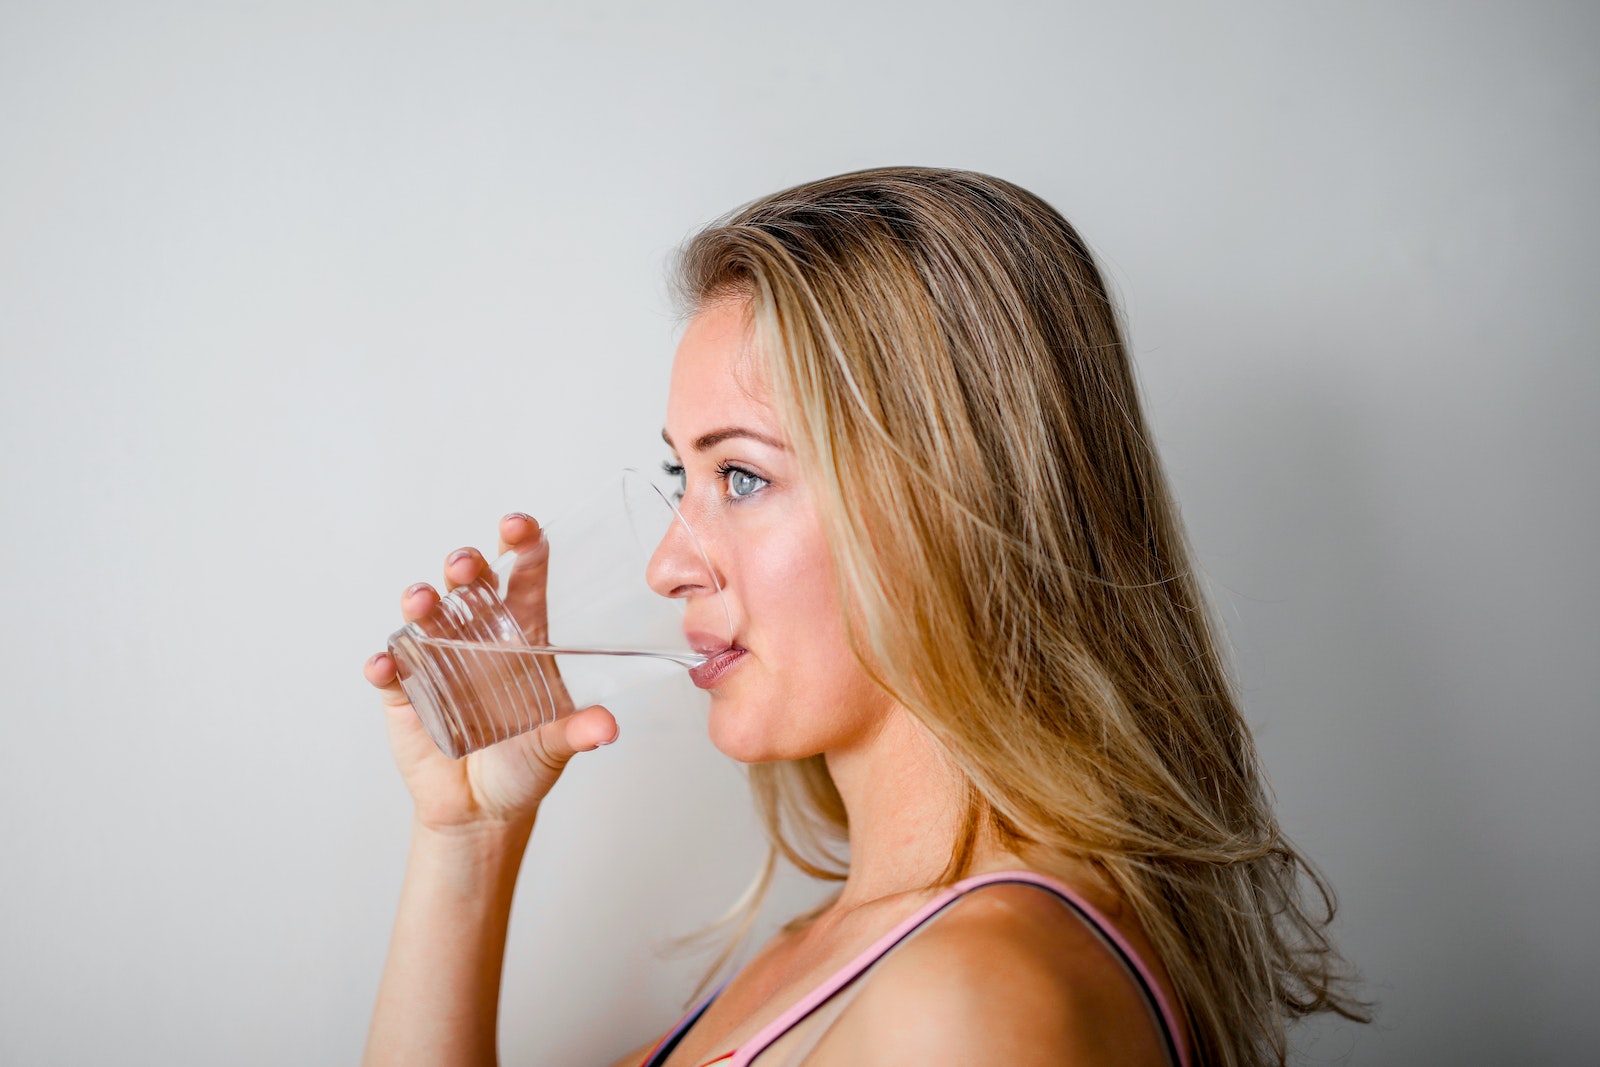 Woman Drinking from Plastic Cup